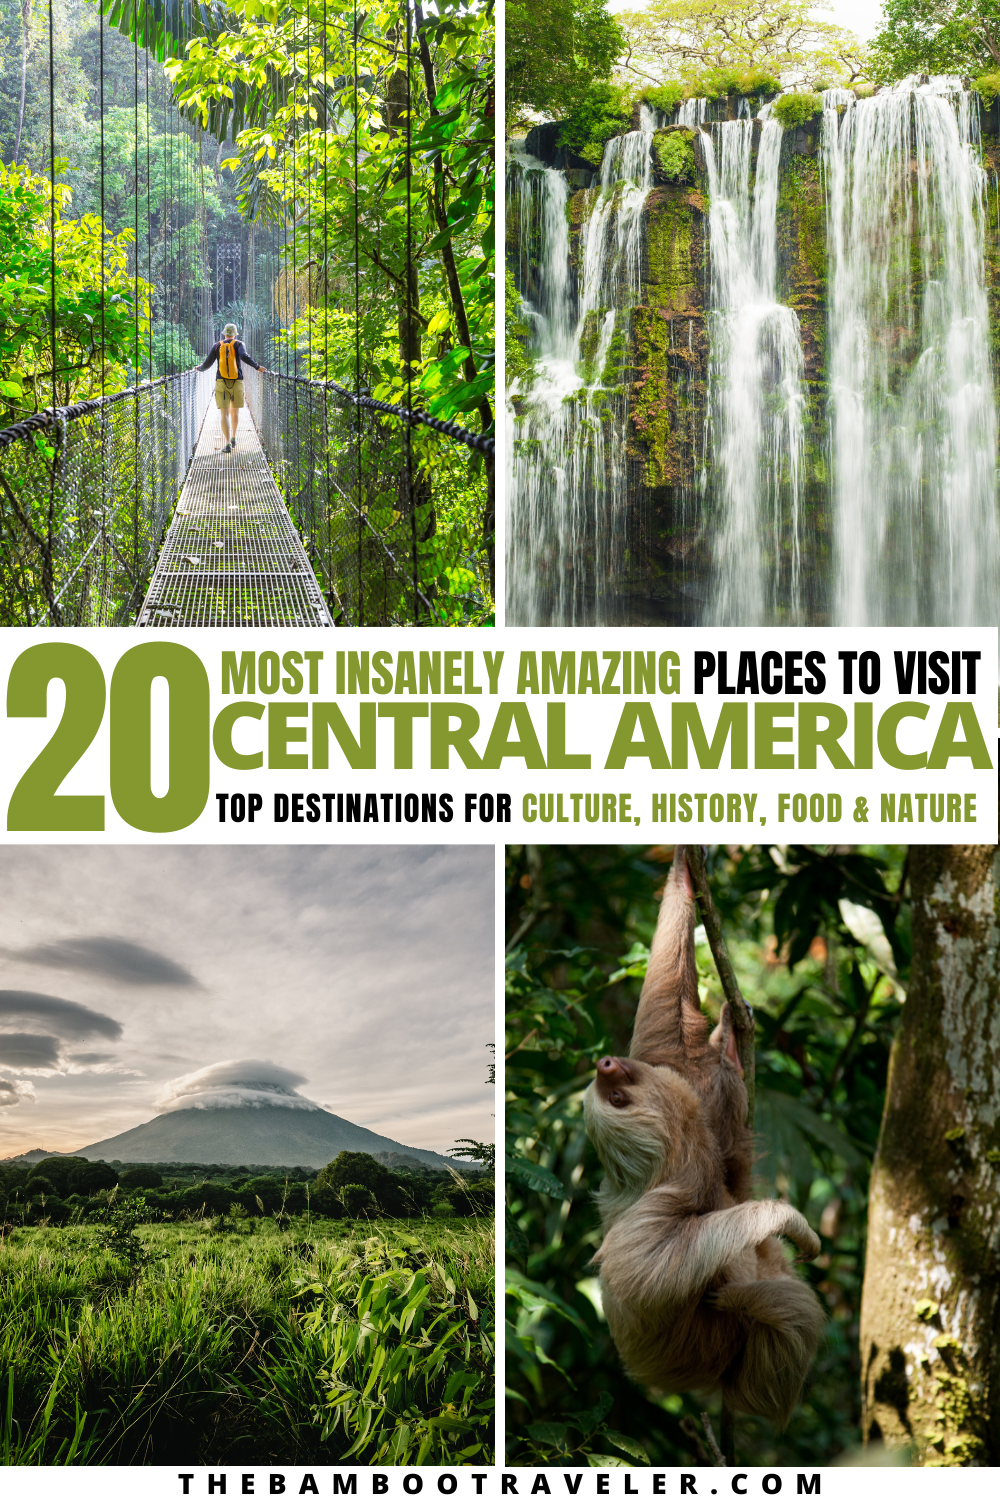 20 Most Insanely Amazing Places to Visit in Central America